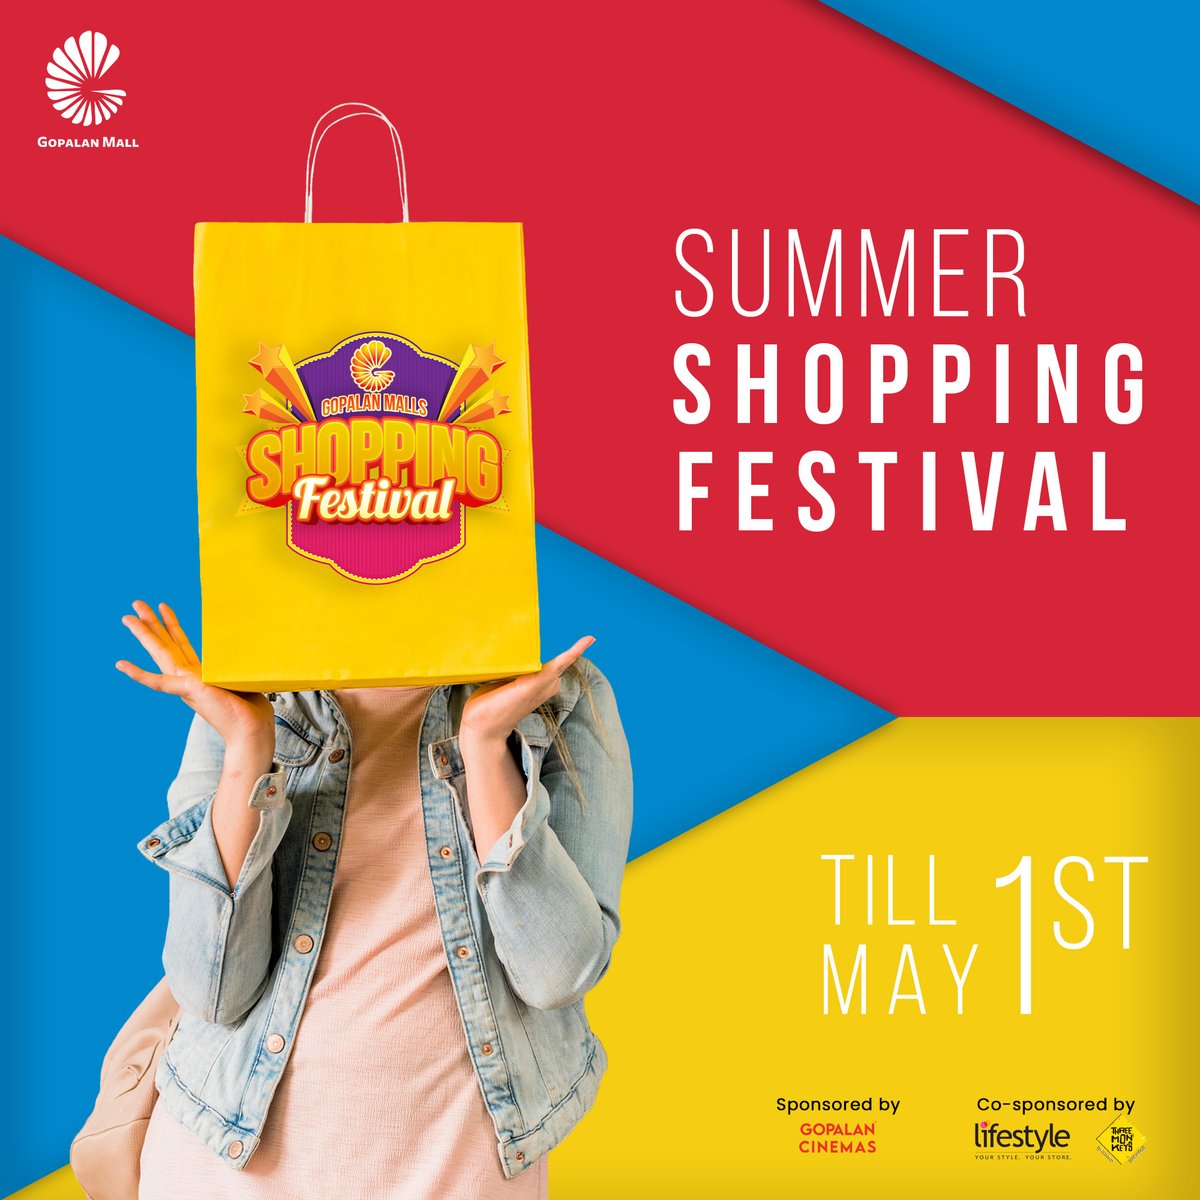 Join us for the Gopalan Mall Summer Shopping Festival until May 1st. Enjoy great deals and beat the heat with your favorite brands. ☀️🛍️

Hurry up shop now at Gopalan Mall.

#GopalanMall #Gopalan #shoppingmall #summerfestival